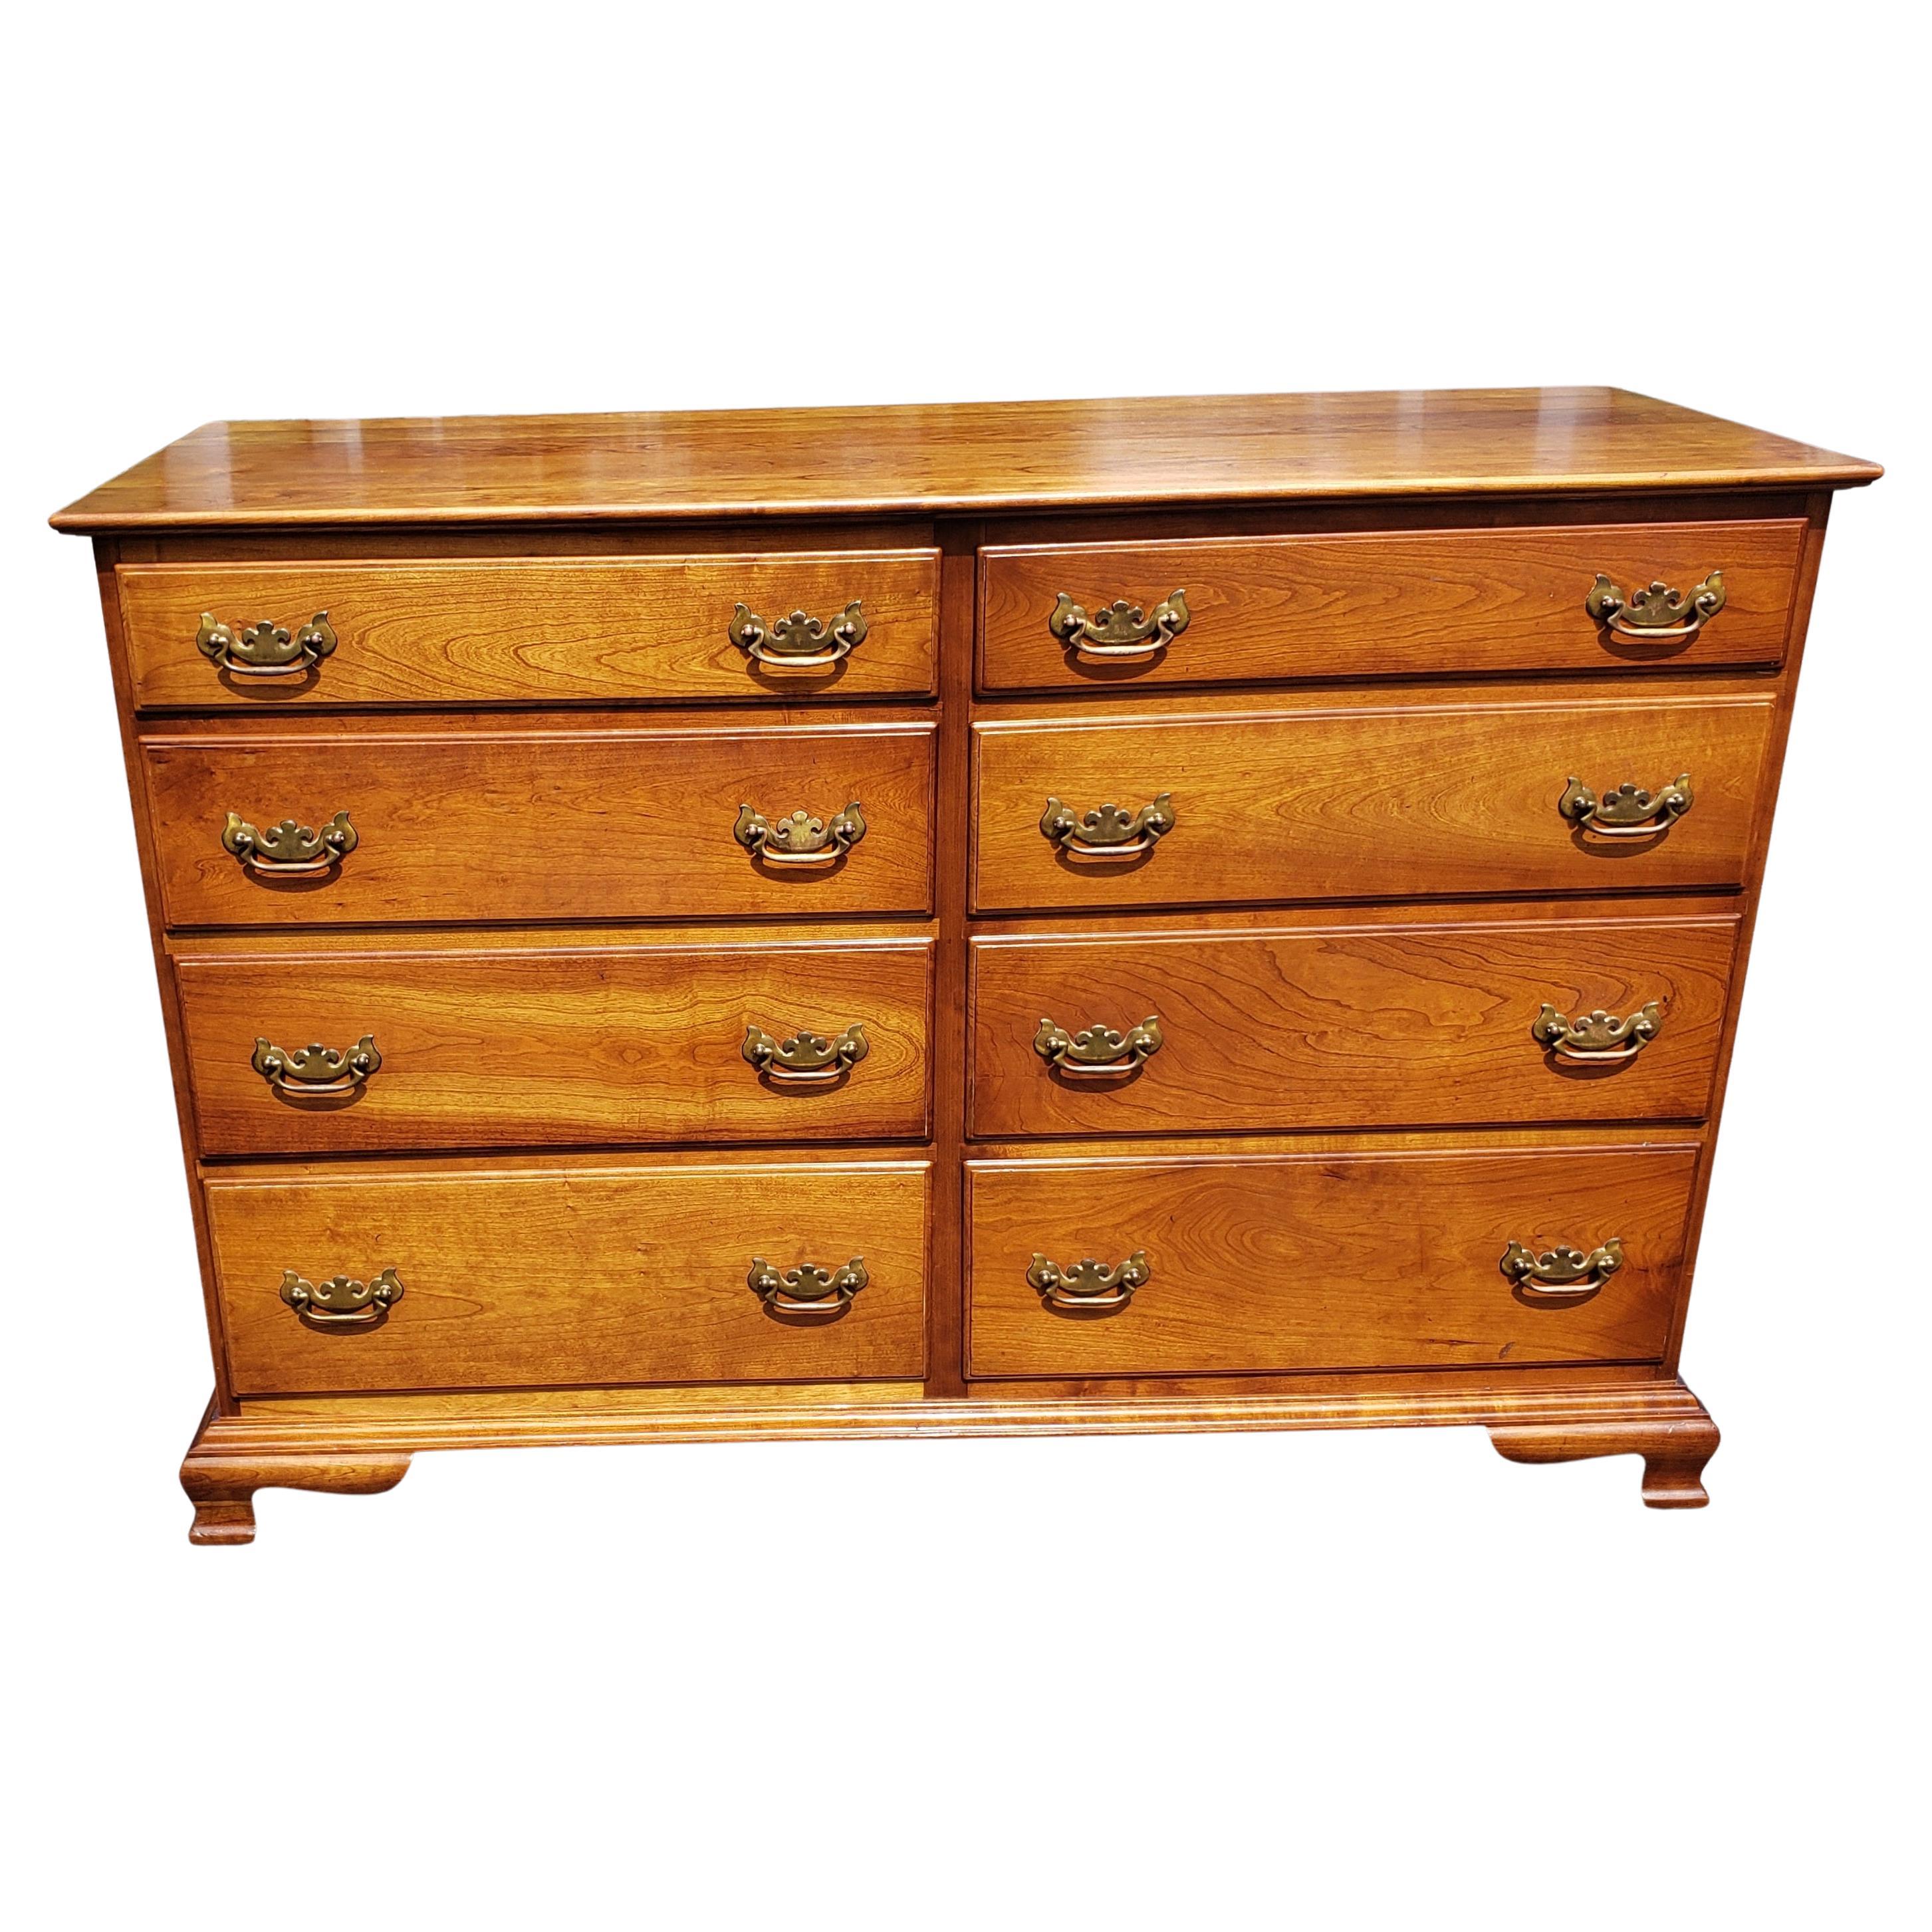 1957, Stickley Furniture Chippendale Solid Cherry 8-Drawer Double Dresser